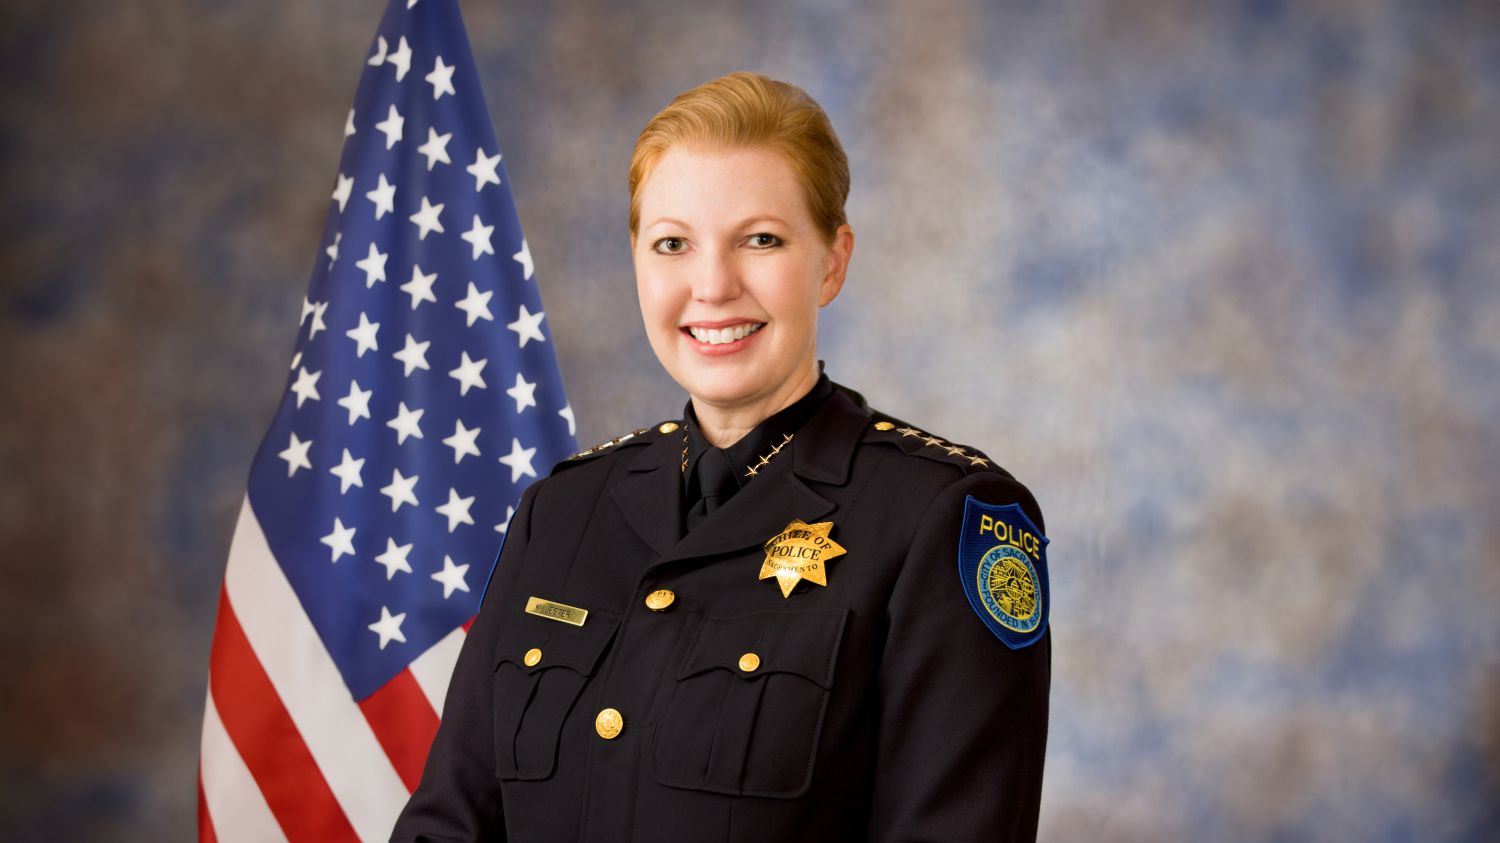 A portrait photo of the Sacramento Police Department Chief of Police, Katherine Lester, in full class-A uniform